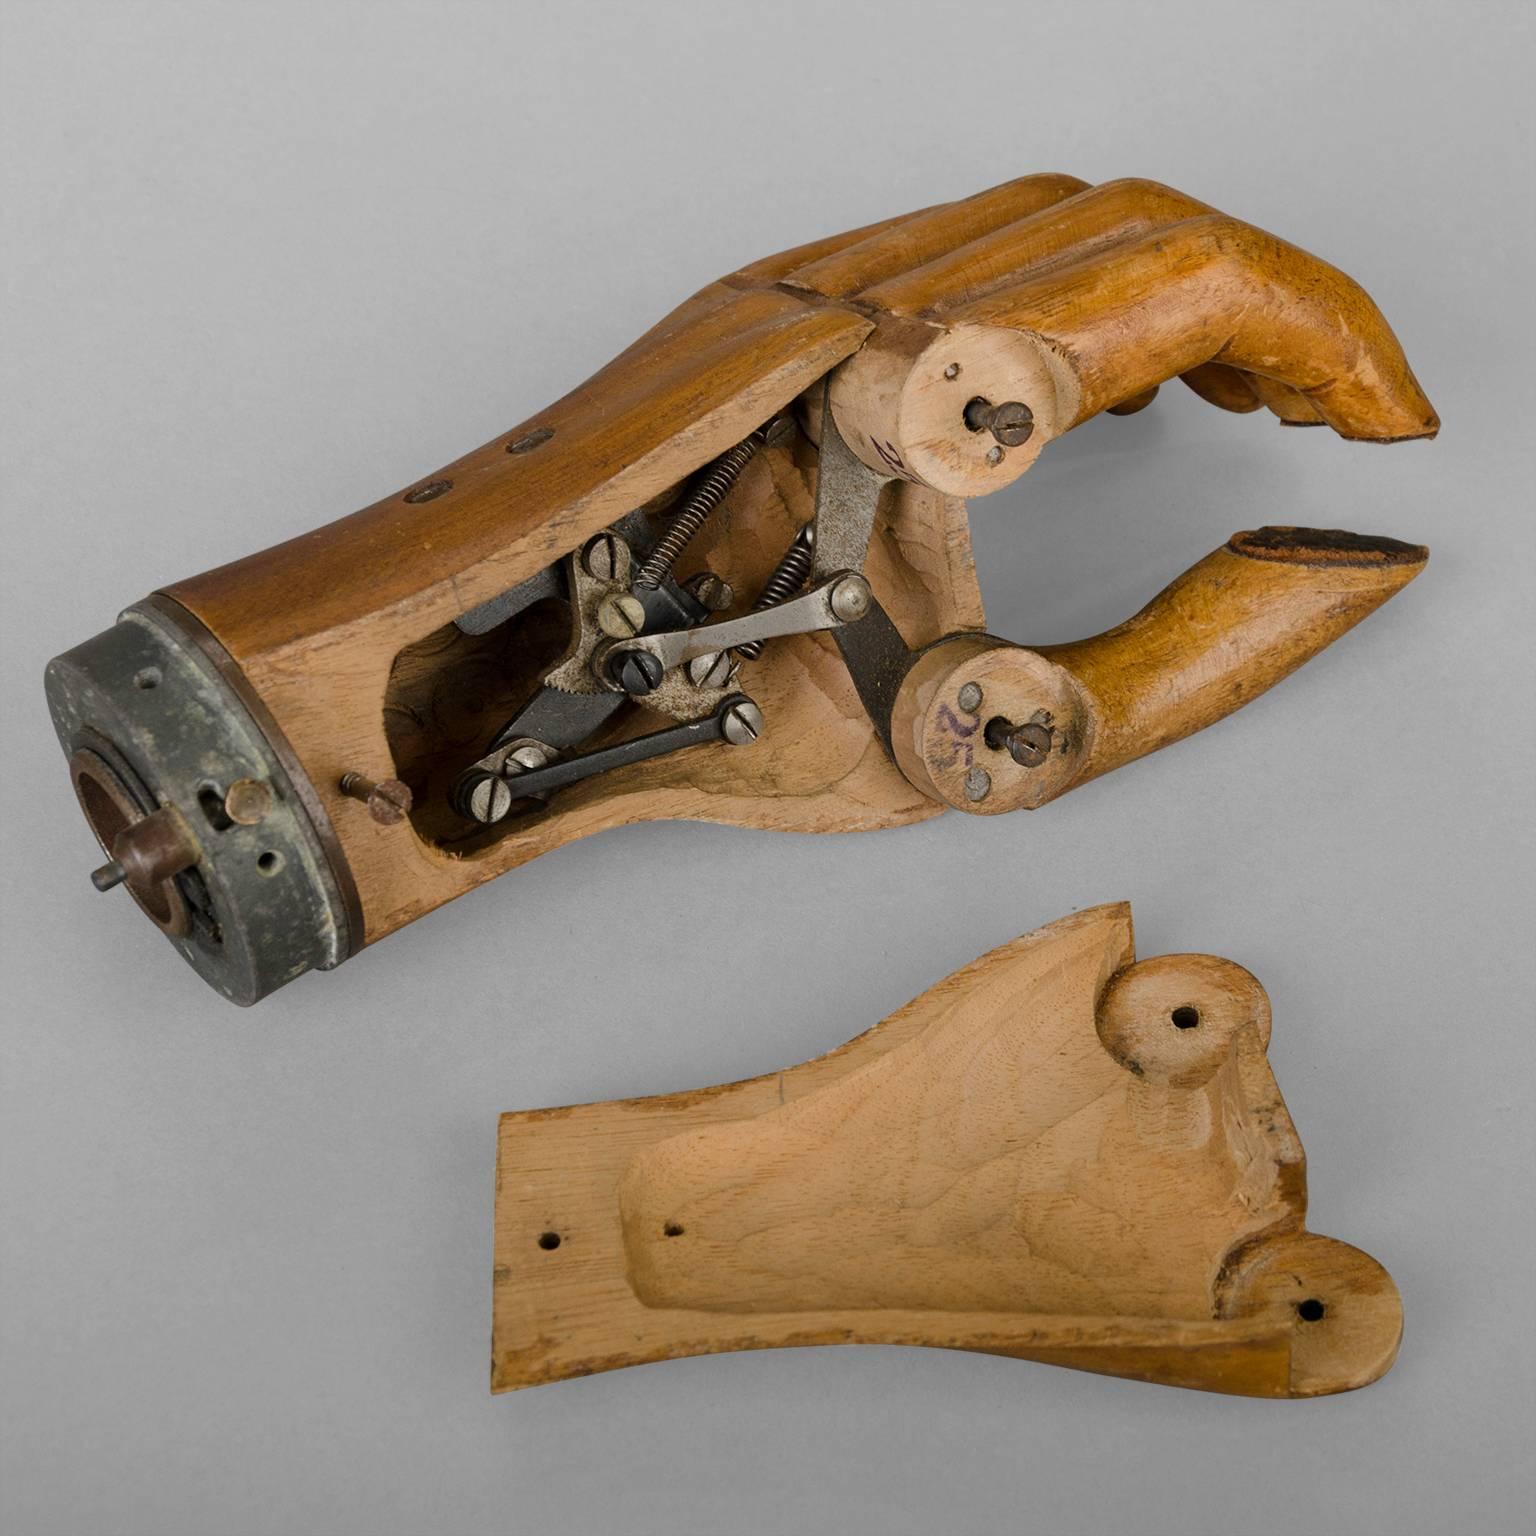 This carved wood prosthesis is equipped with two mechanisms in working condition:

The first, at the wrist, allowing the rotation of the entire hand.

The second, by a toothed rack system, allows the grip of objects between the thumb, index and